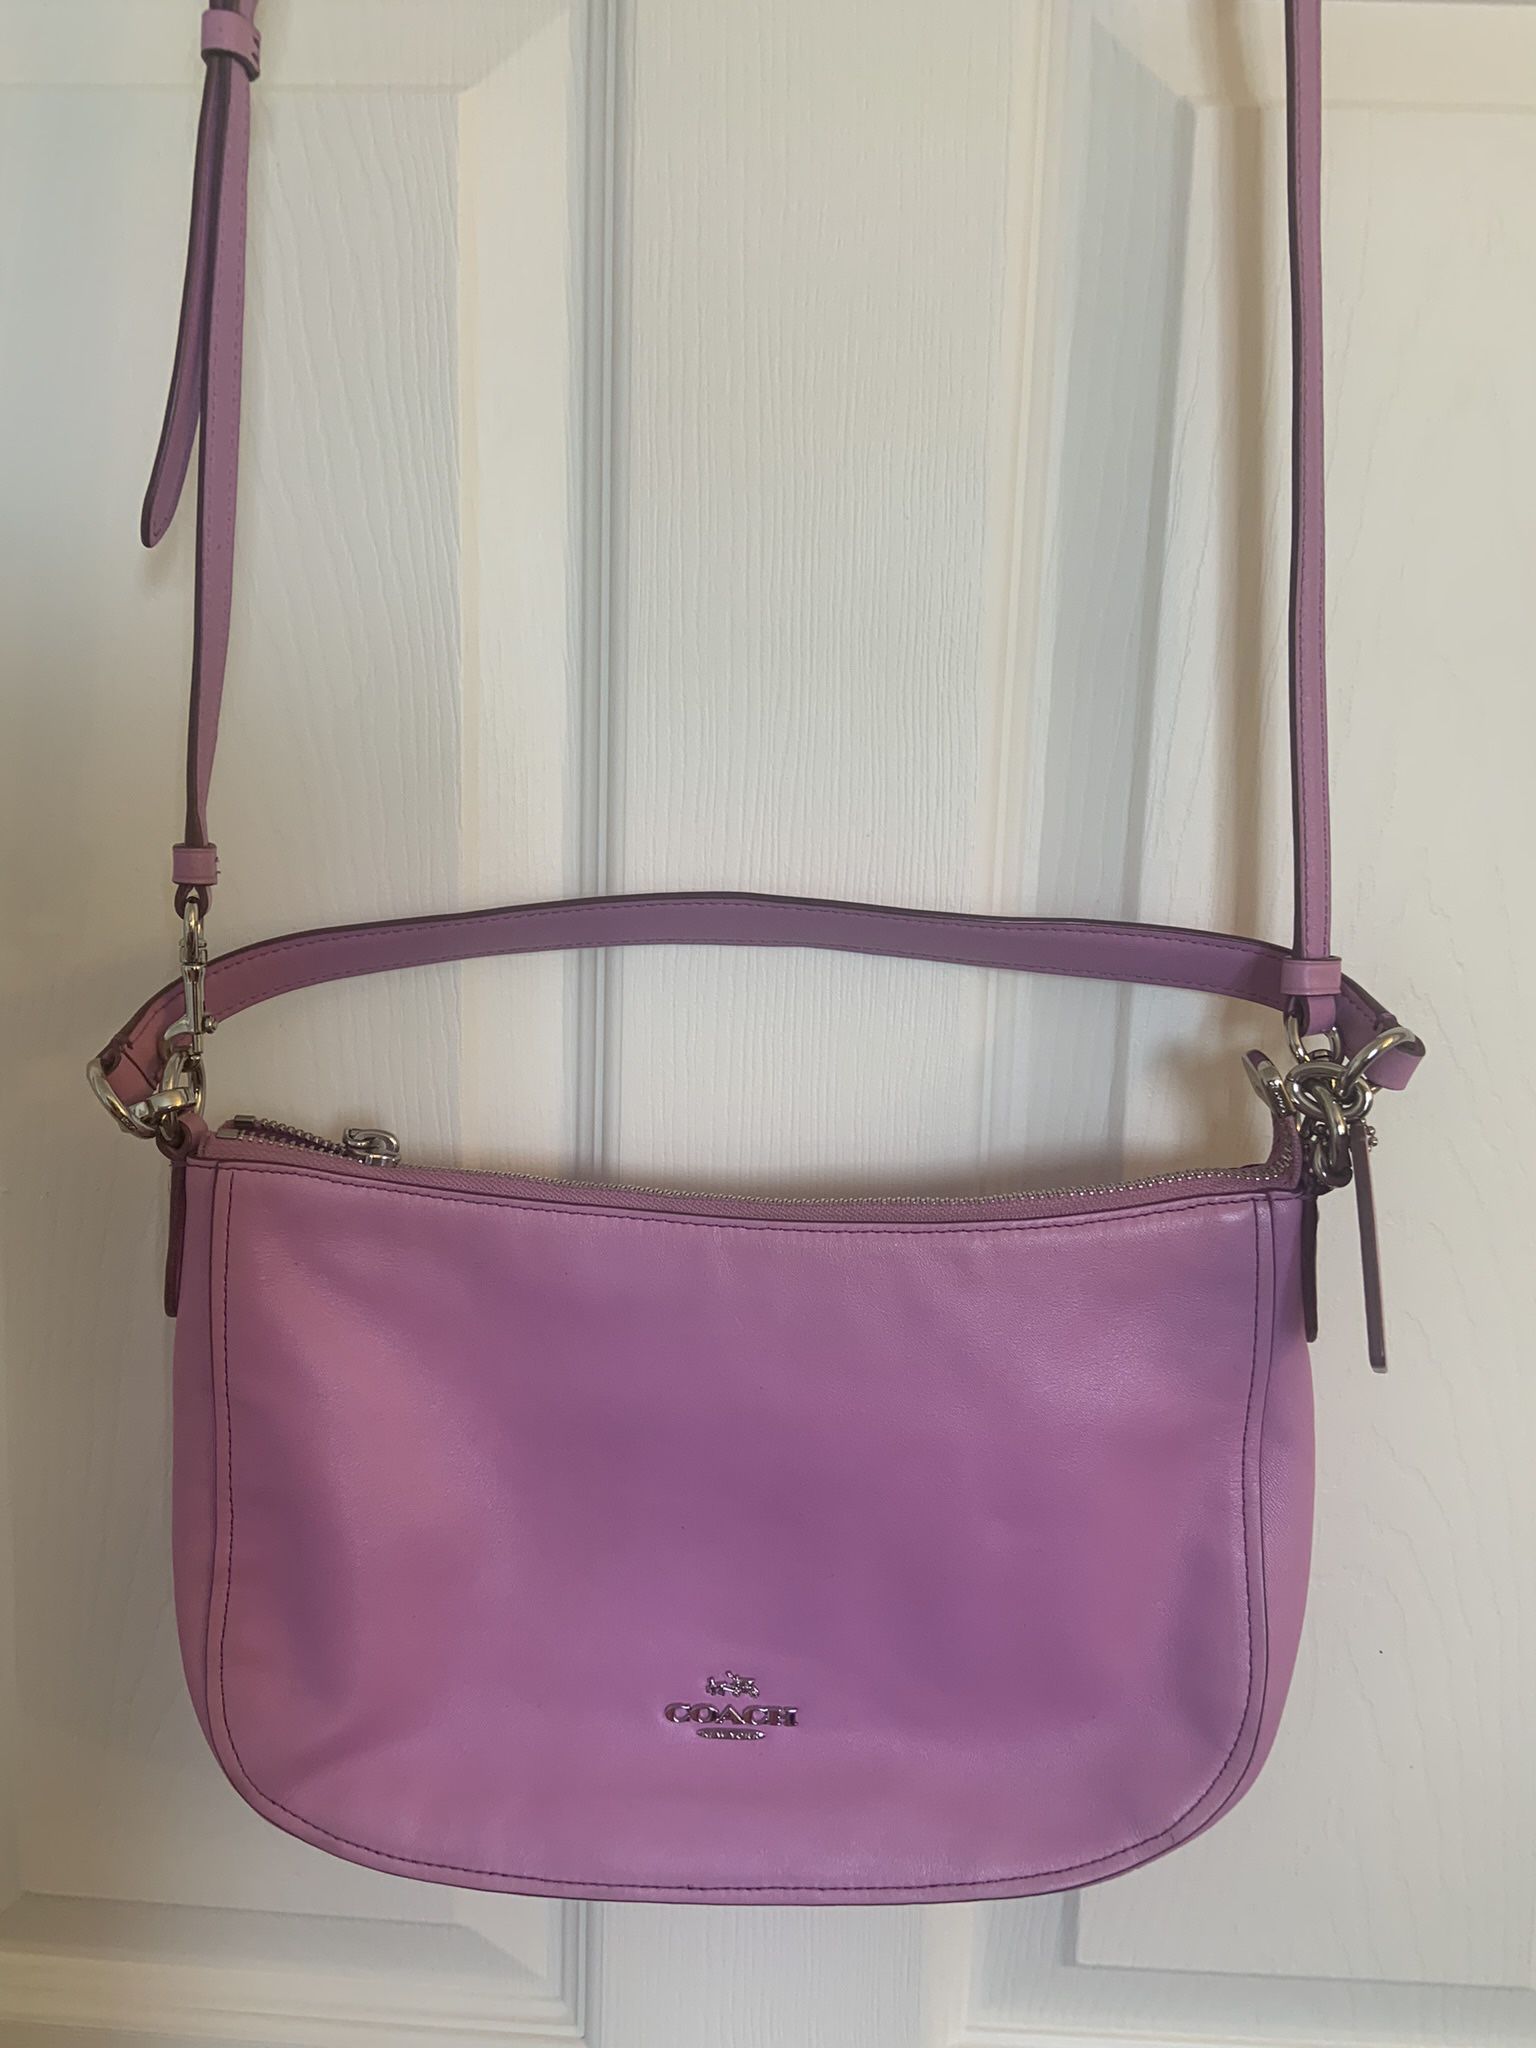 **COACH Purse** Orchid/Lavender Smooth Leather 